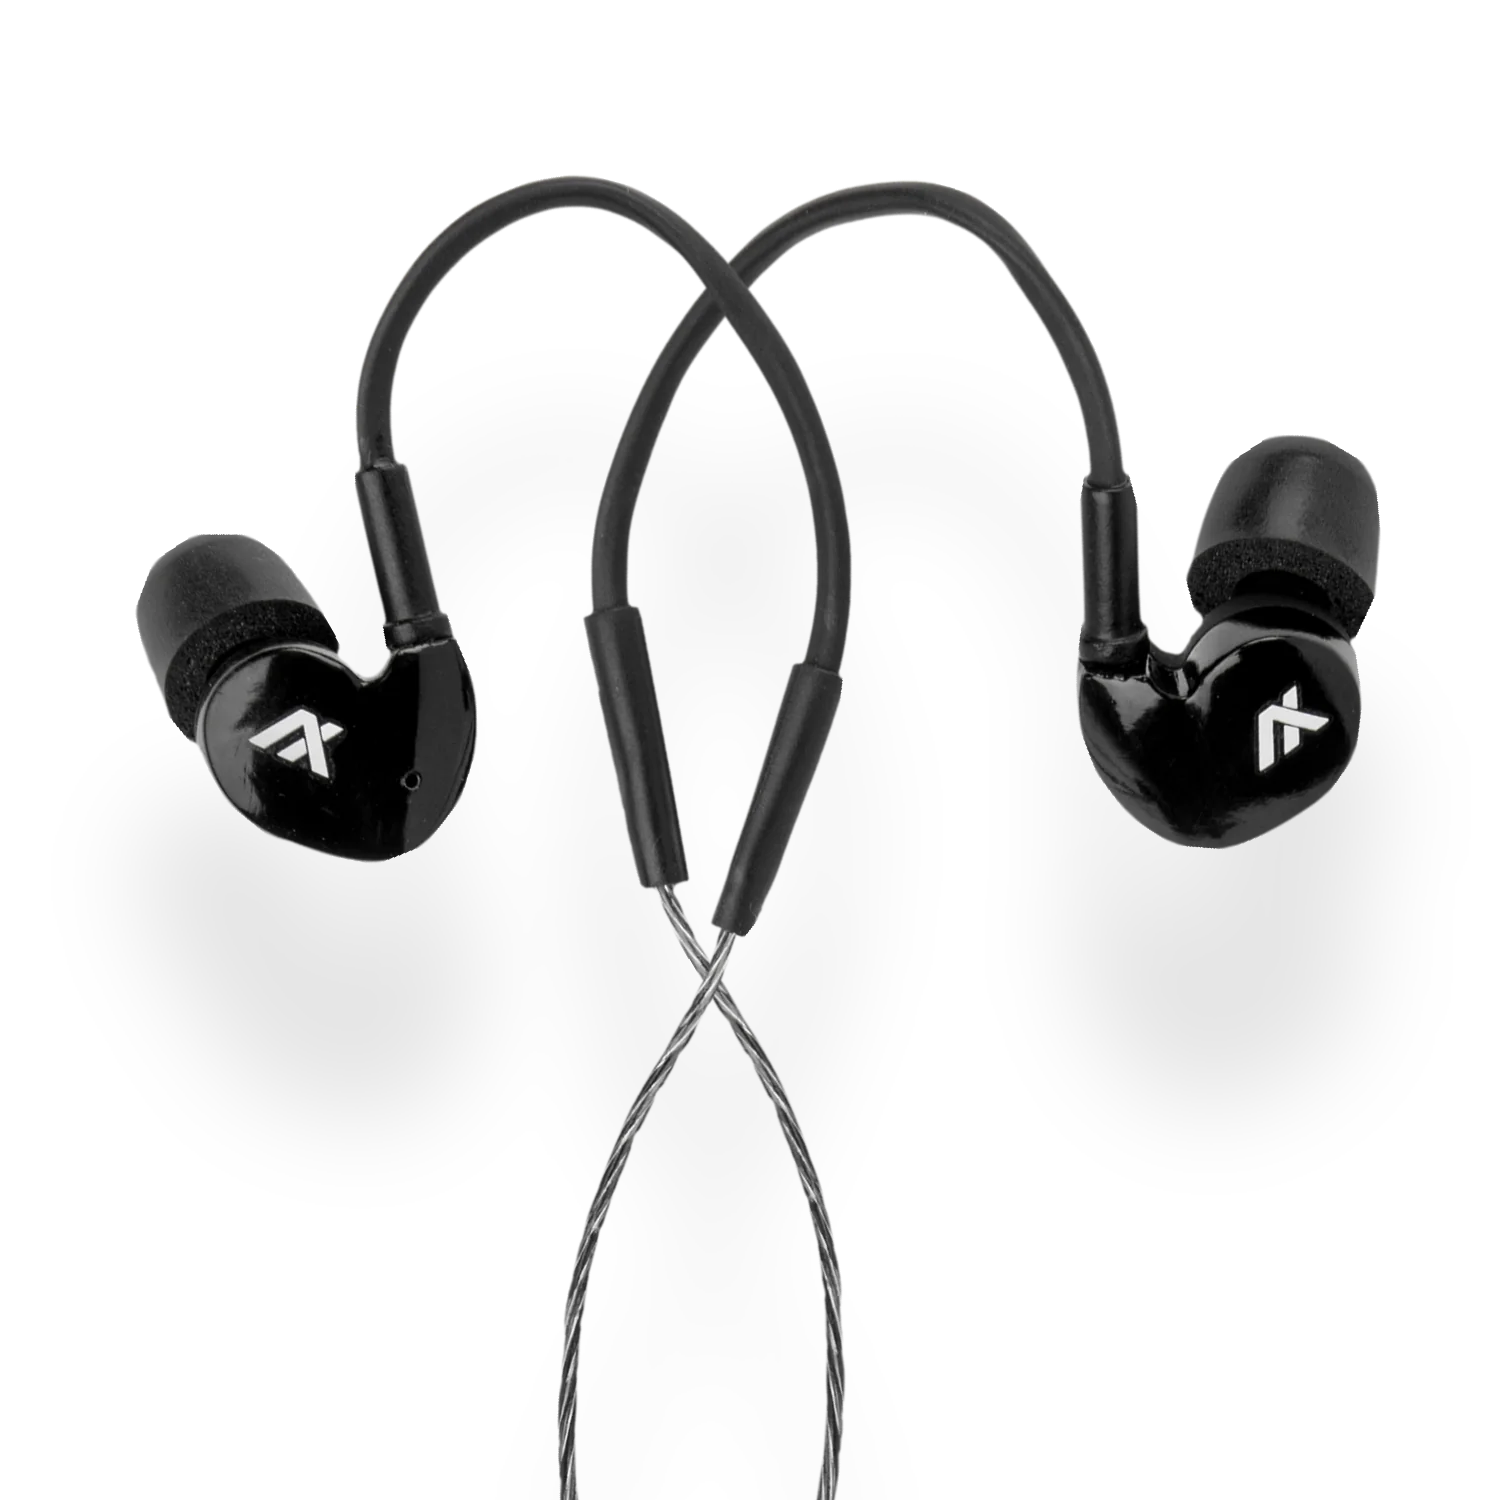 https://cityarsenal.com/product/axil-ghost-stryke-extreme-2-0-bluetooth-earbuds-black-gs-xr/